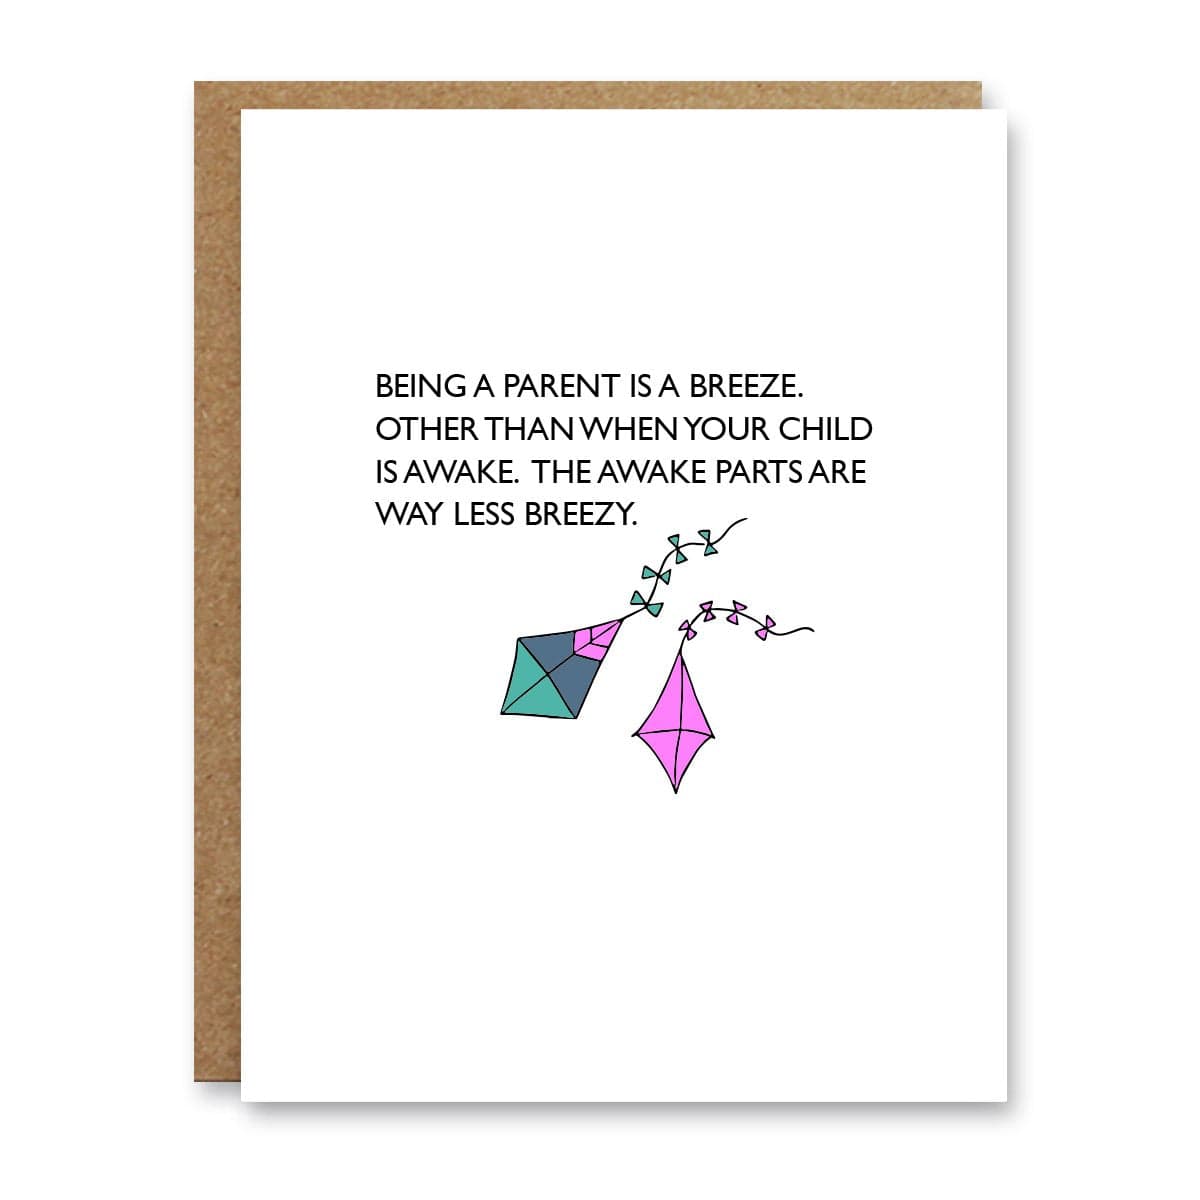 Boo To You Greeting Cards greeting card Boo To You 'Being A Parent Is A Breeze' Greeting Card